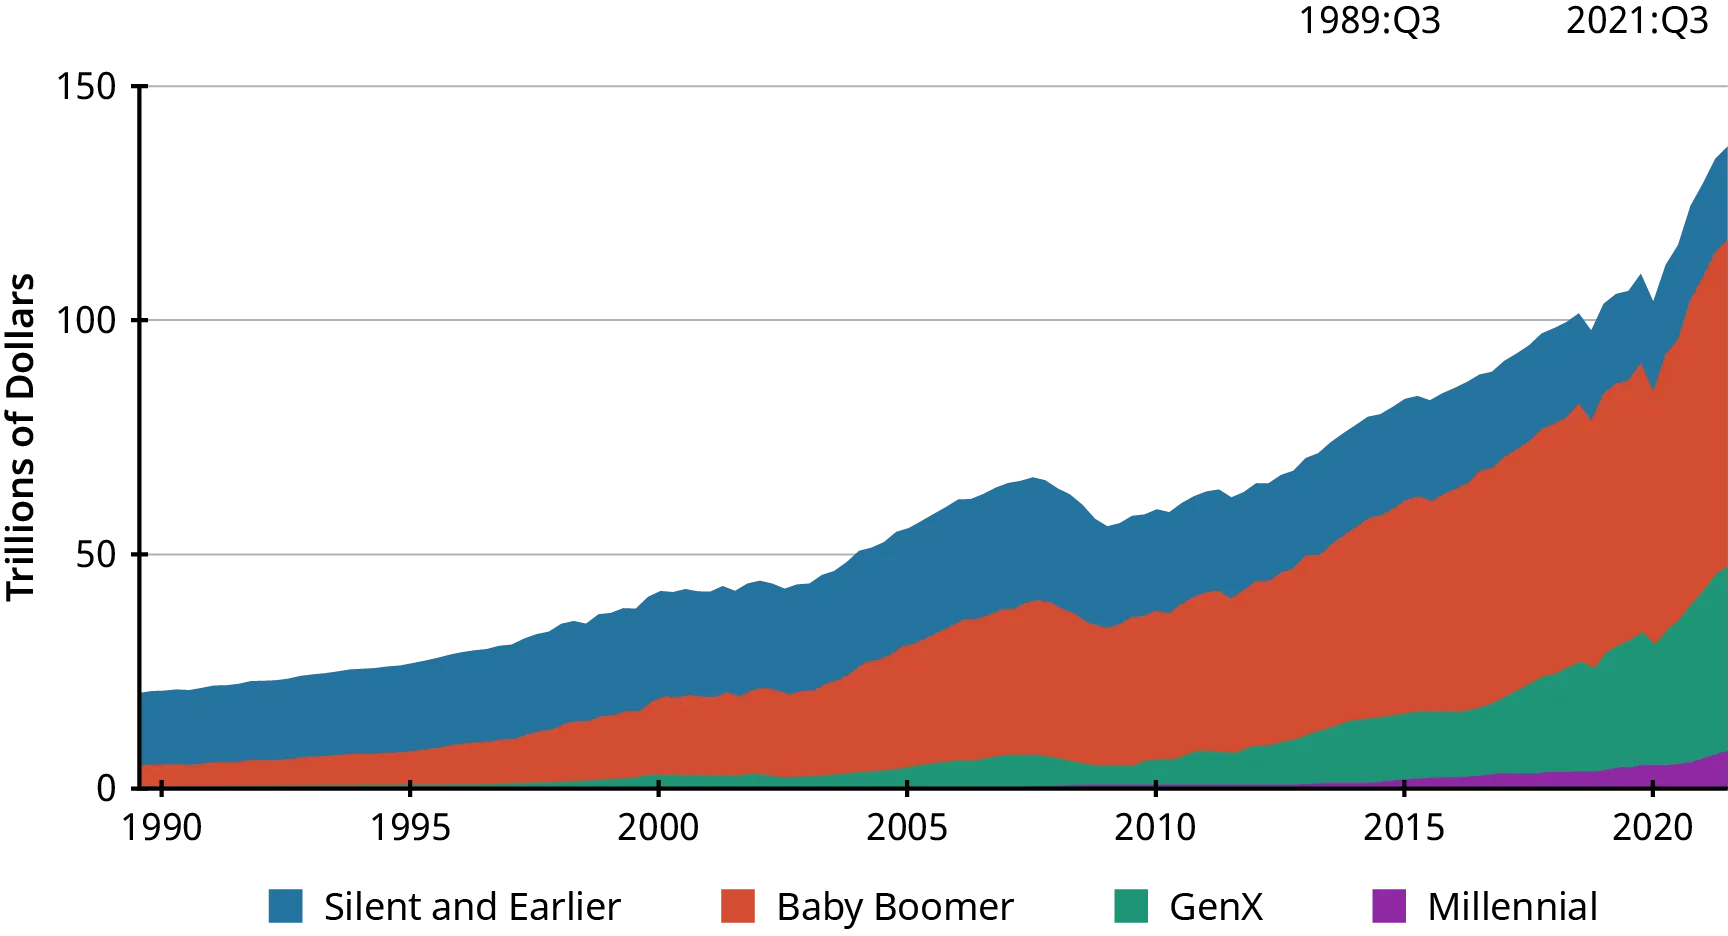 A chart shows wealth distribution by generation in trillions of dollars. The chart starts in 1990 and ends in 2020. At the beginning of the chart, less than 25 trillion dollars of wealth is shown; most of that is controlled by the Silent and earlier generations, with the Baby Boomers having some of the wealth. Baby Boomer wealth continues to grown throughout while the Silent and earlier generations percentage stays about the same until after 2015. Gen X first appears on the chart just before 2000 and Millennials appear just before 2015. By 2020, there is almost 150 trillion dollars in wealth shown; Baby Boomers control most of this; Gen X has the second highest amount, and Millennials and the Silent Generation each have a small amount of this wealth.